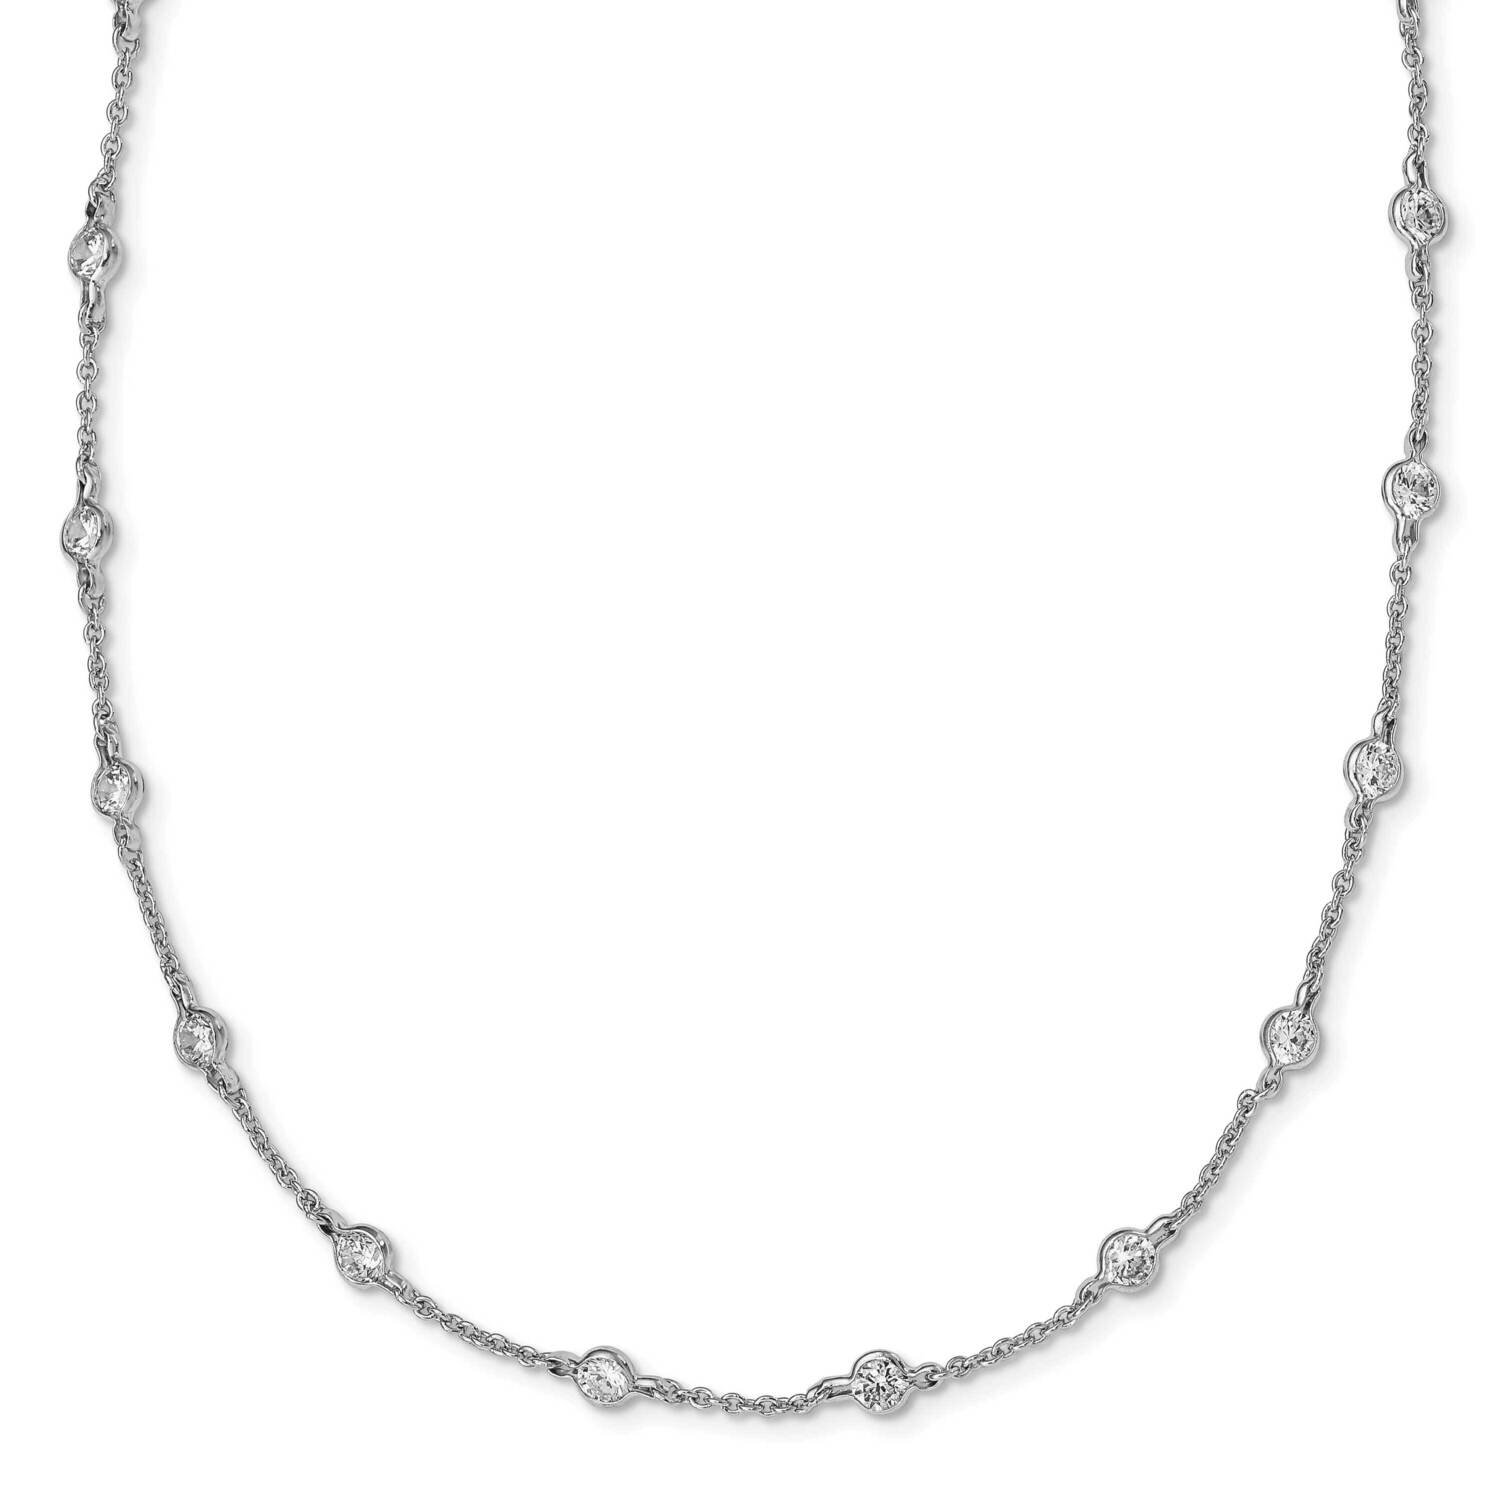 CZ Diamond Station 36 Inch Necklace Sterling Silver Rhodium Plated QCM701-36